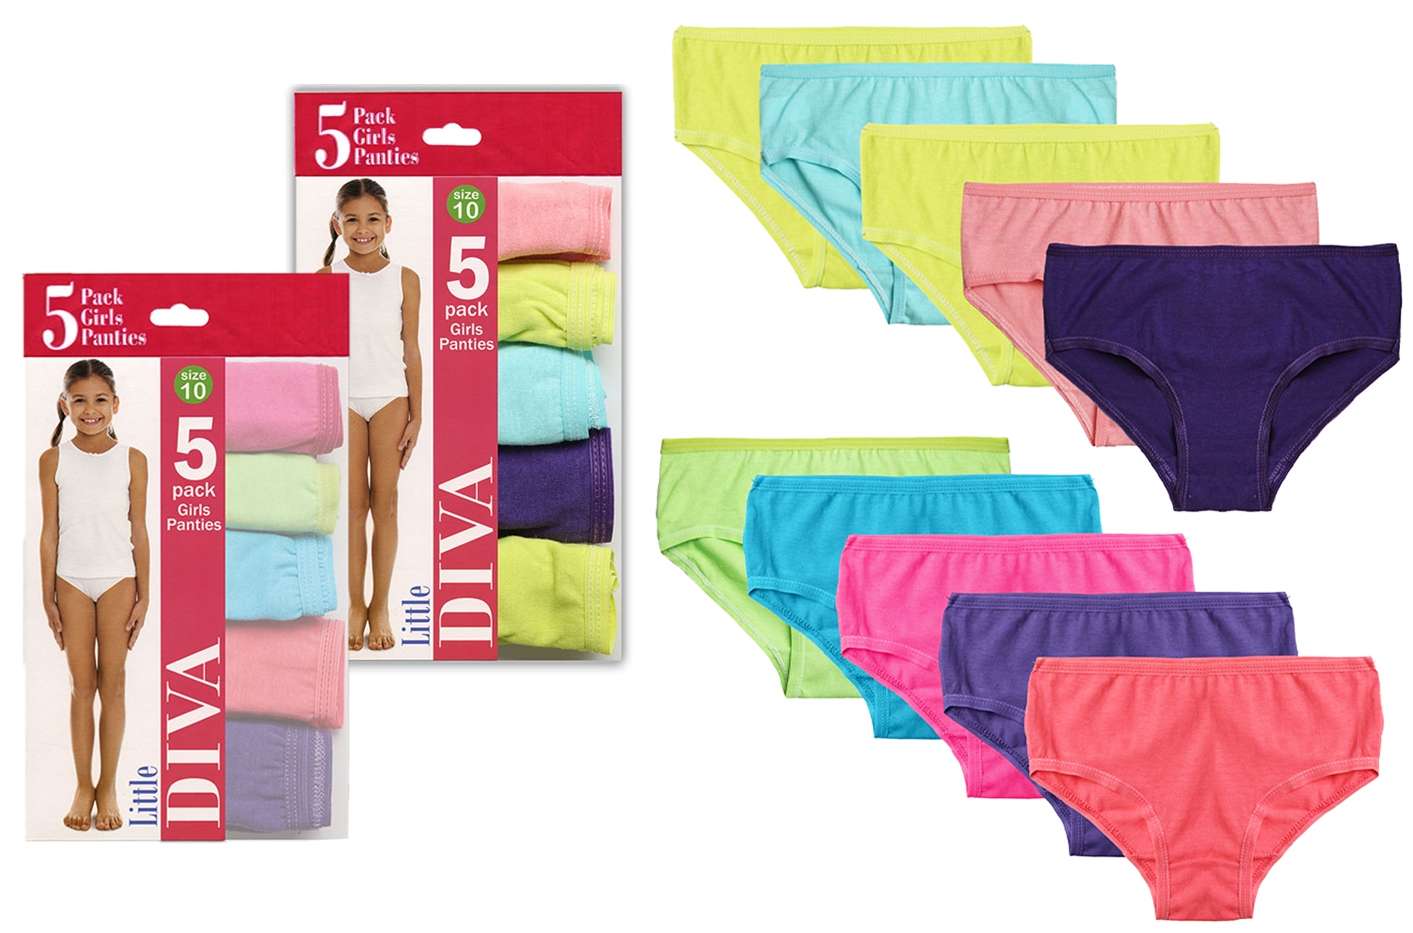 Girls' Underwear - Fun Solid Colors, Size 10, 5 Pack